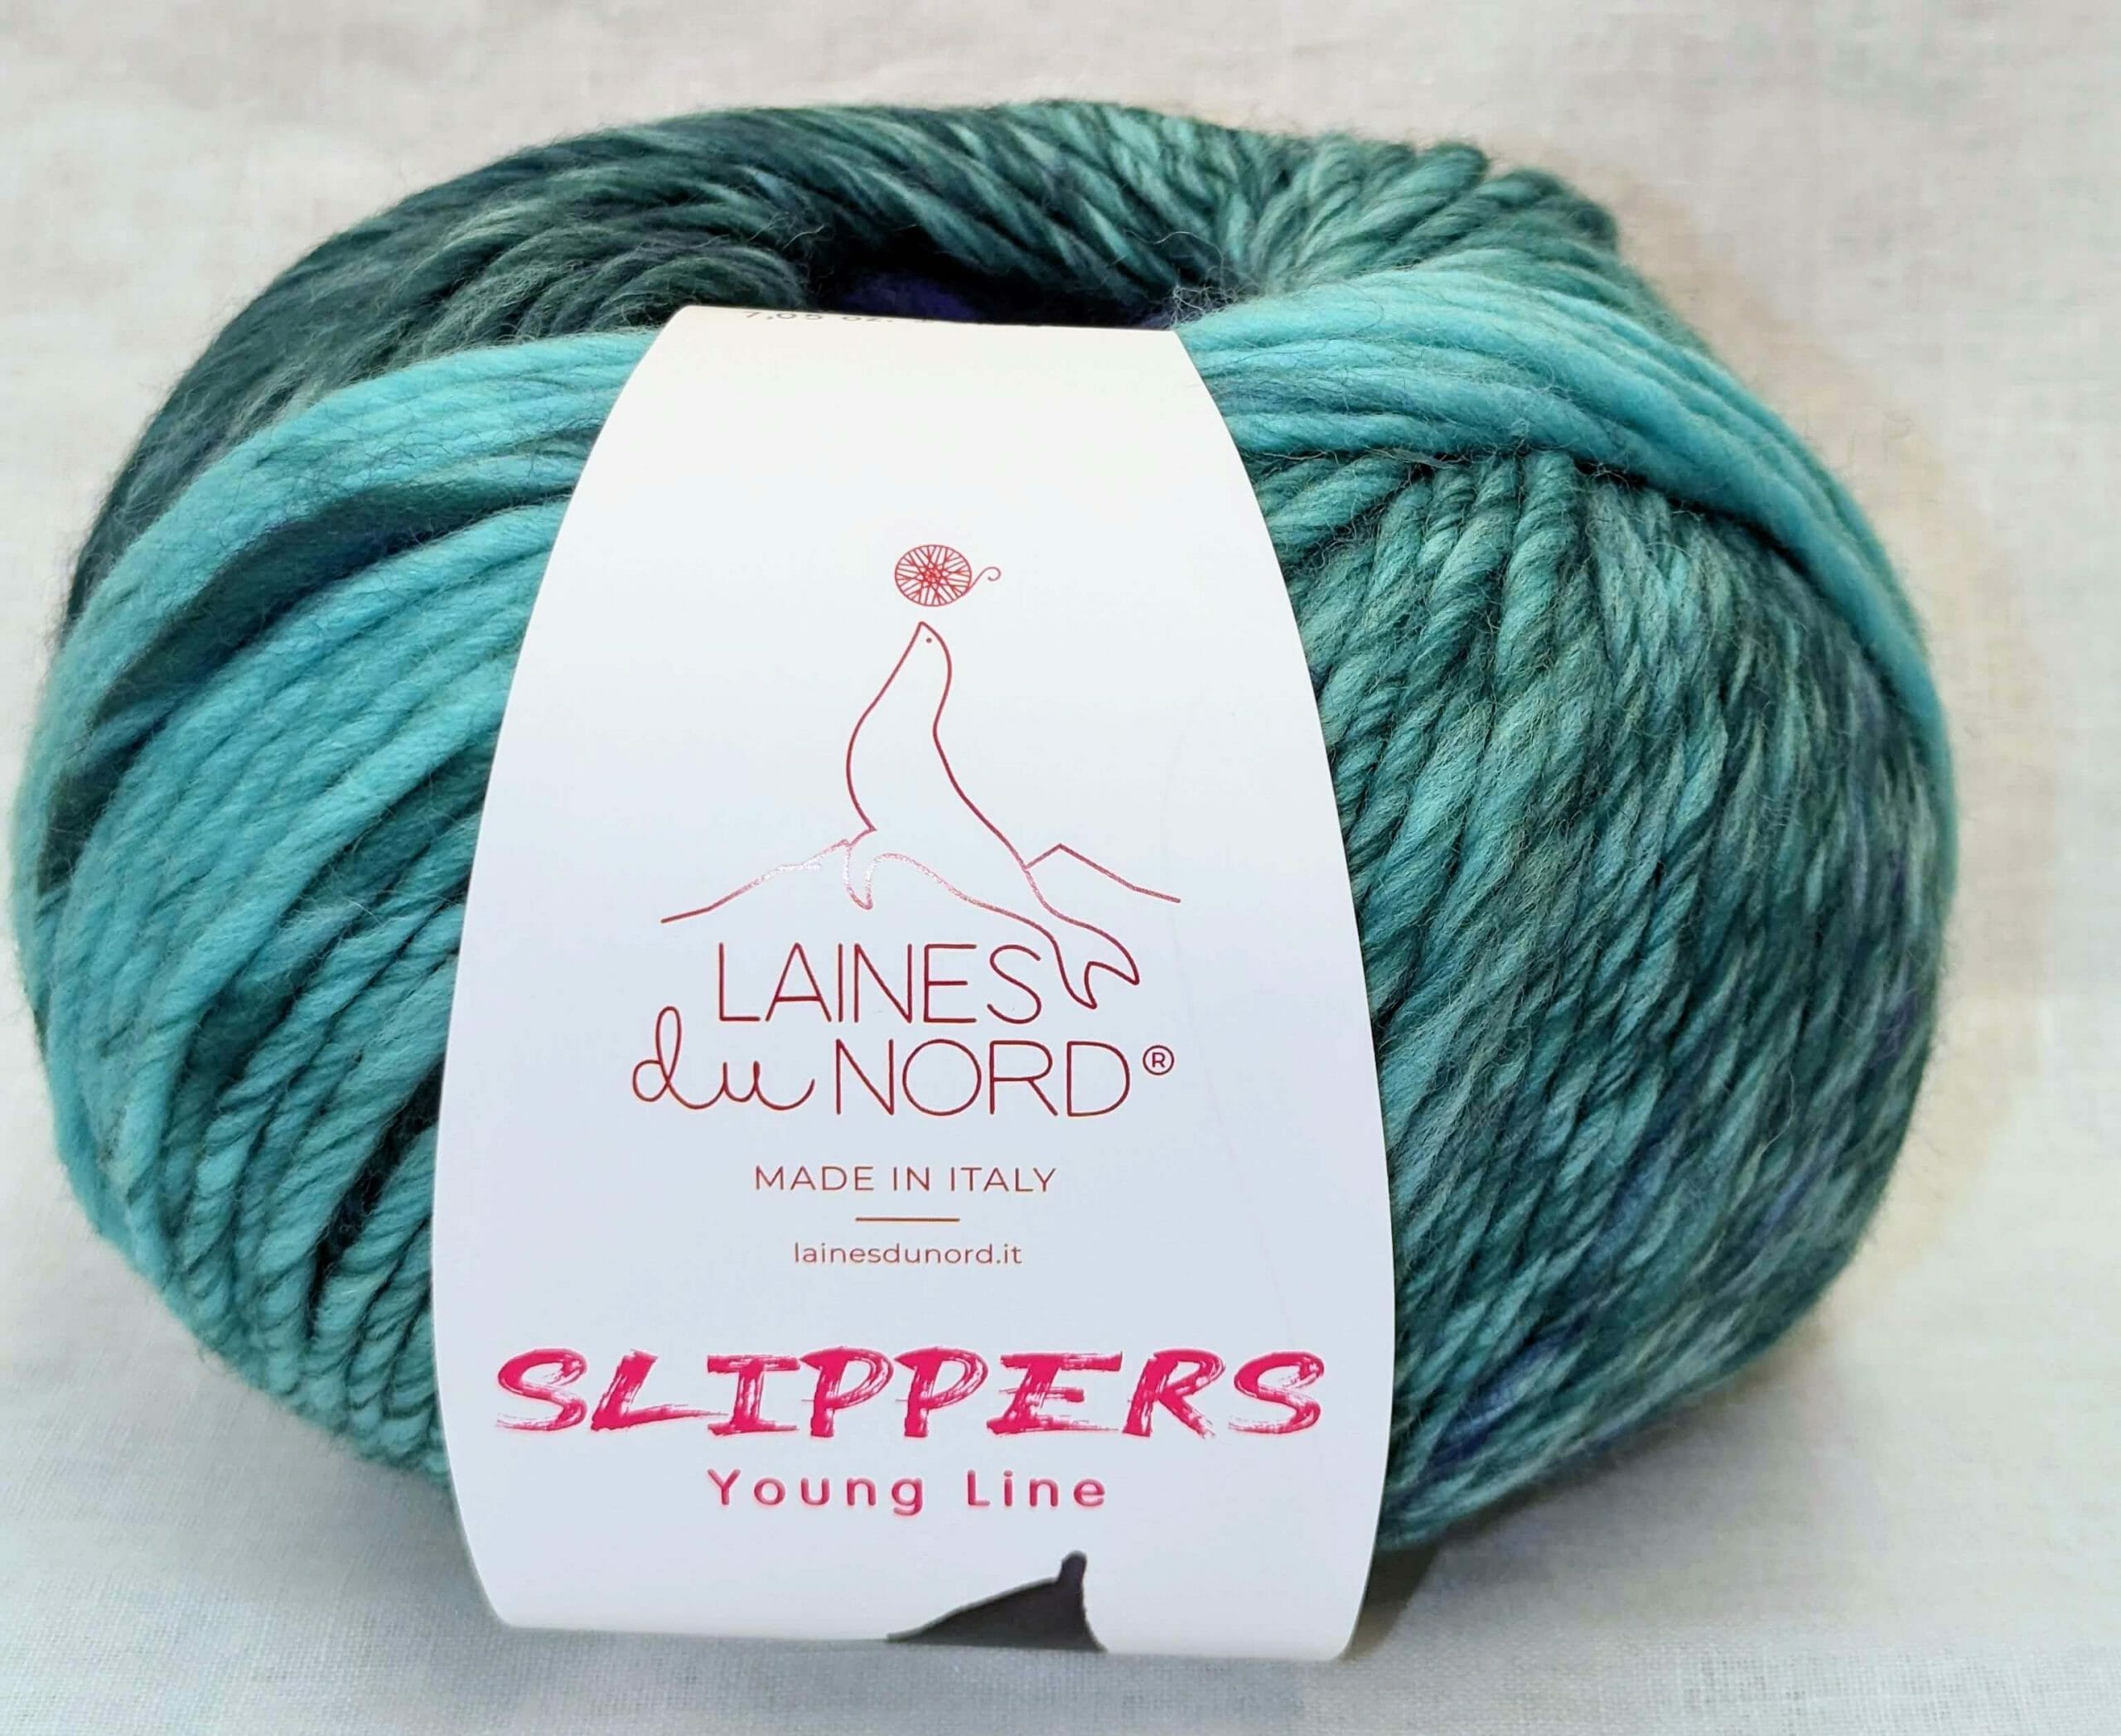 Laines du nord - Slippers